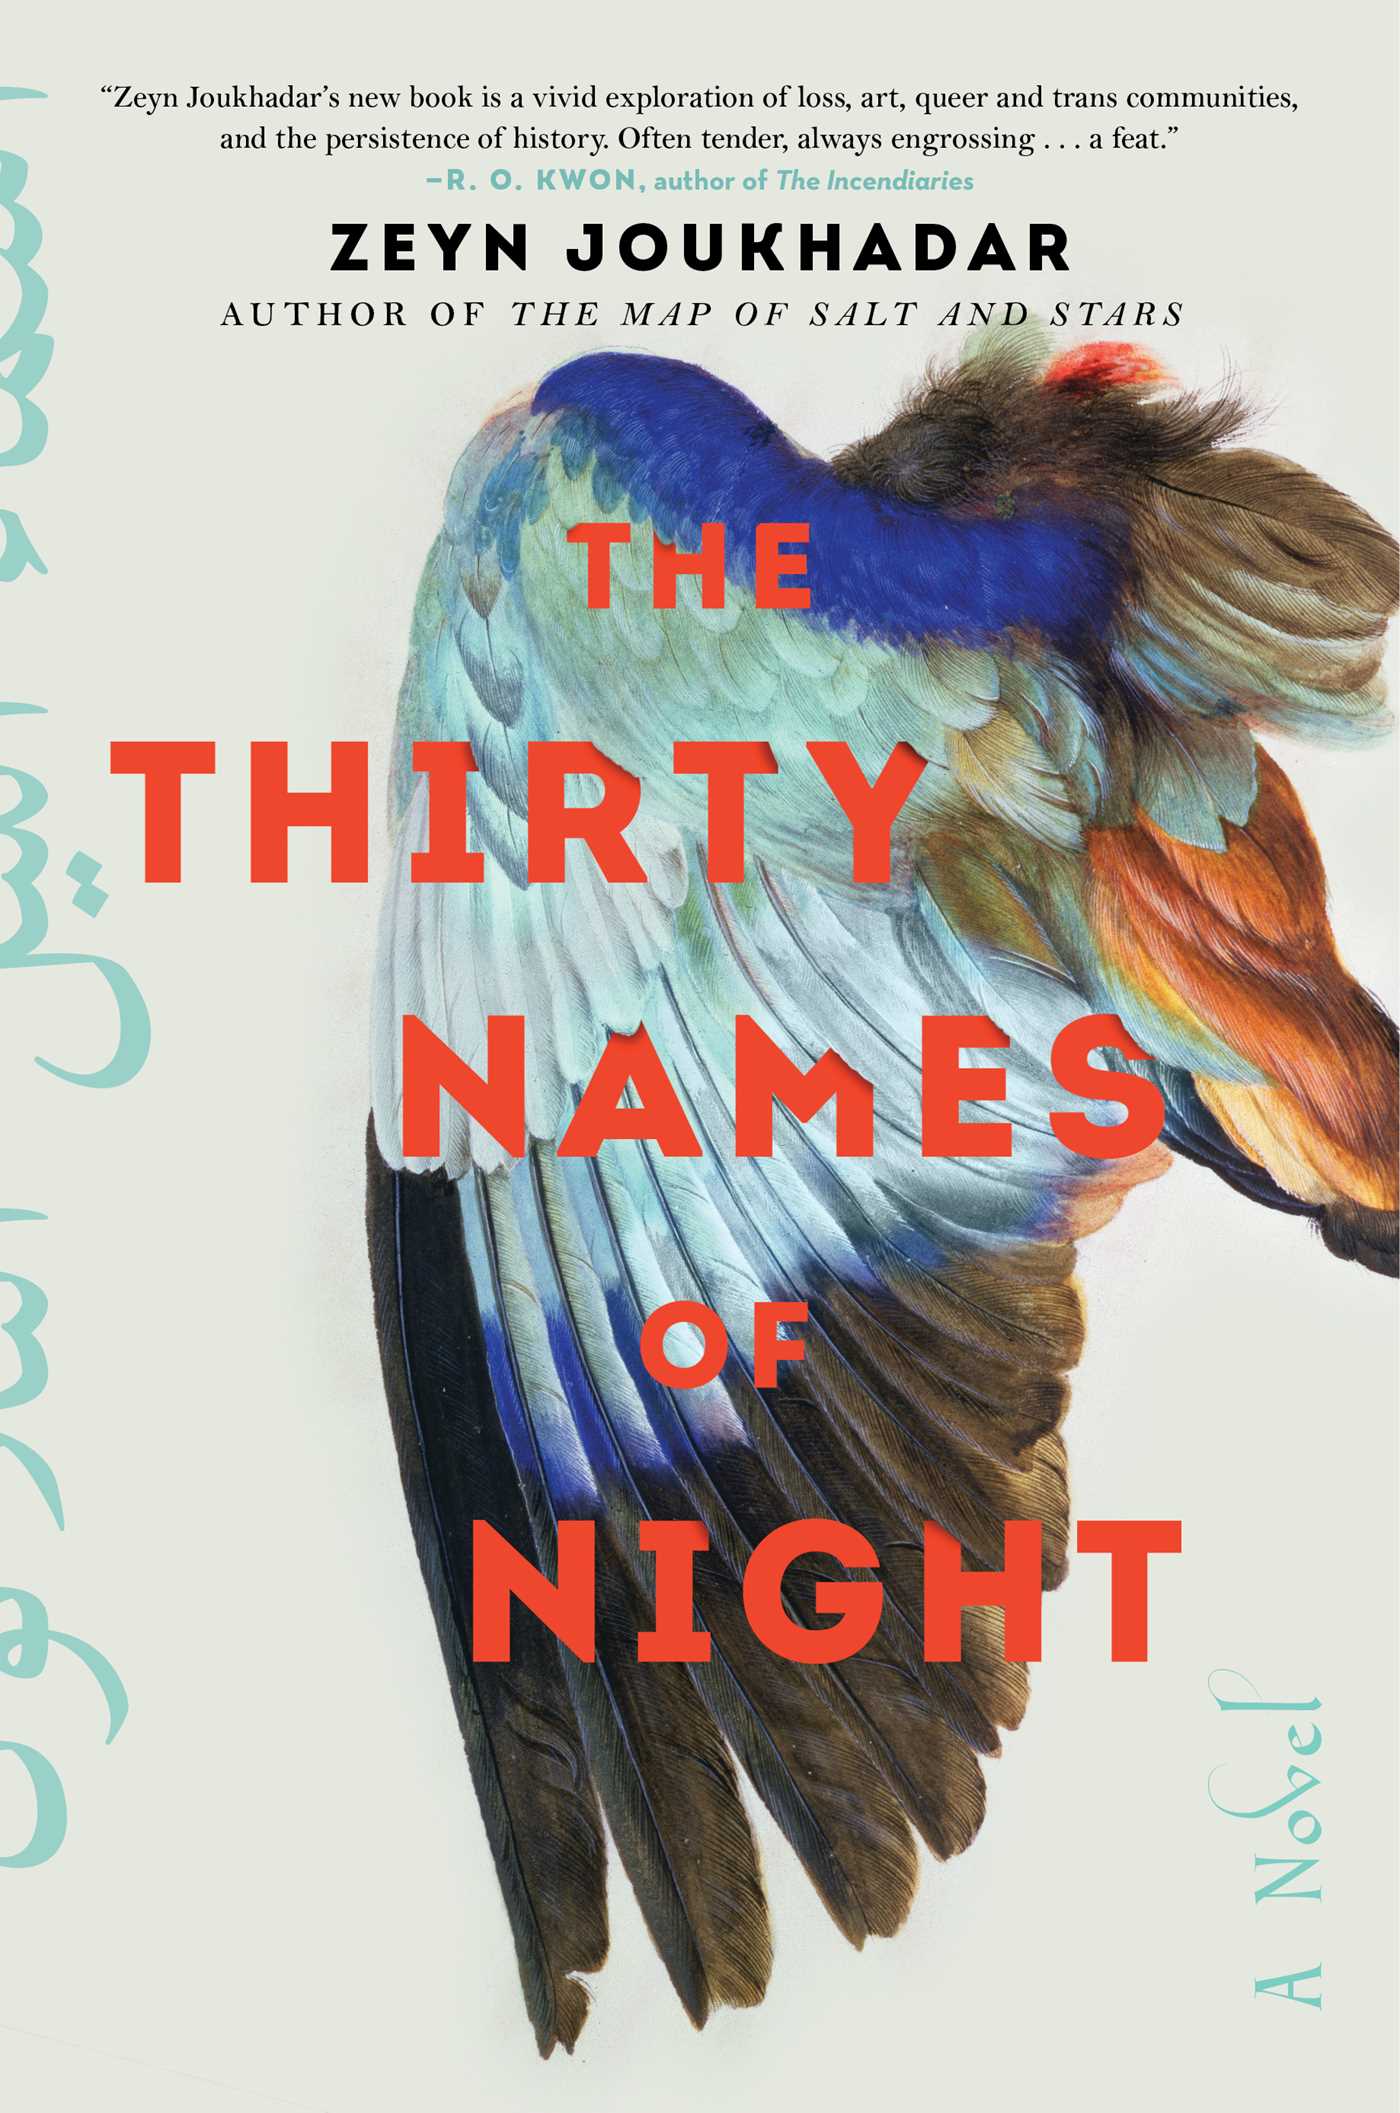 Sunset Park Book Discussion: The Thirty Names of Night by Zeyn Joukhadar